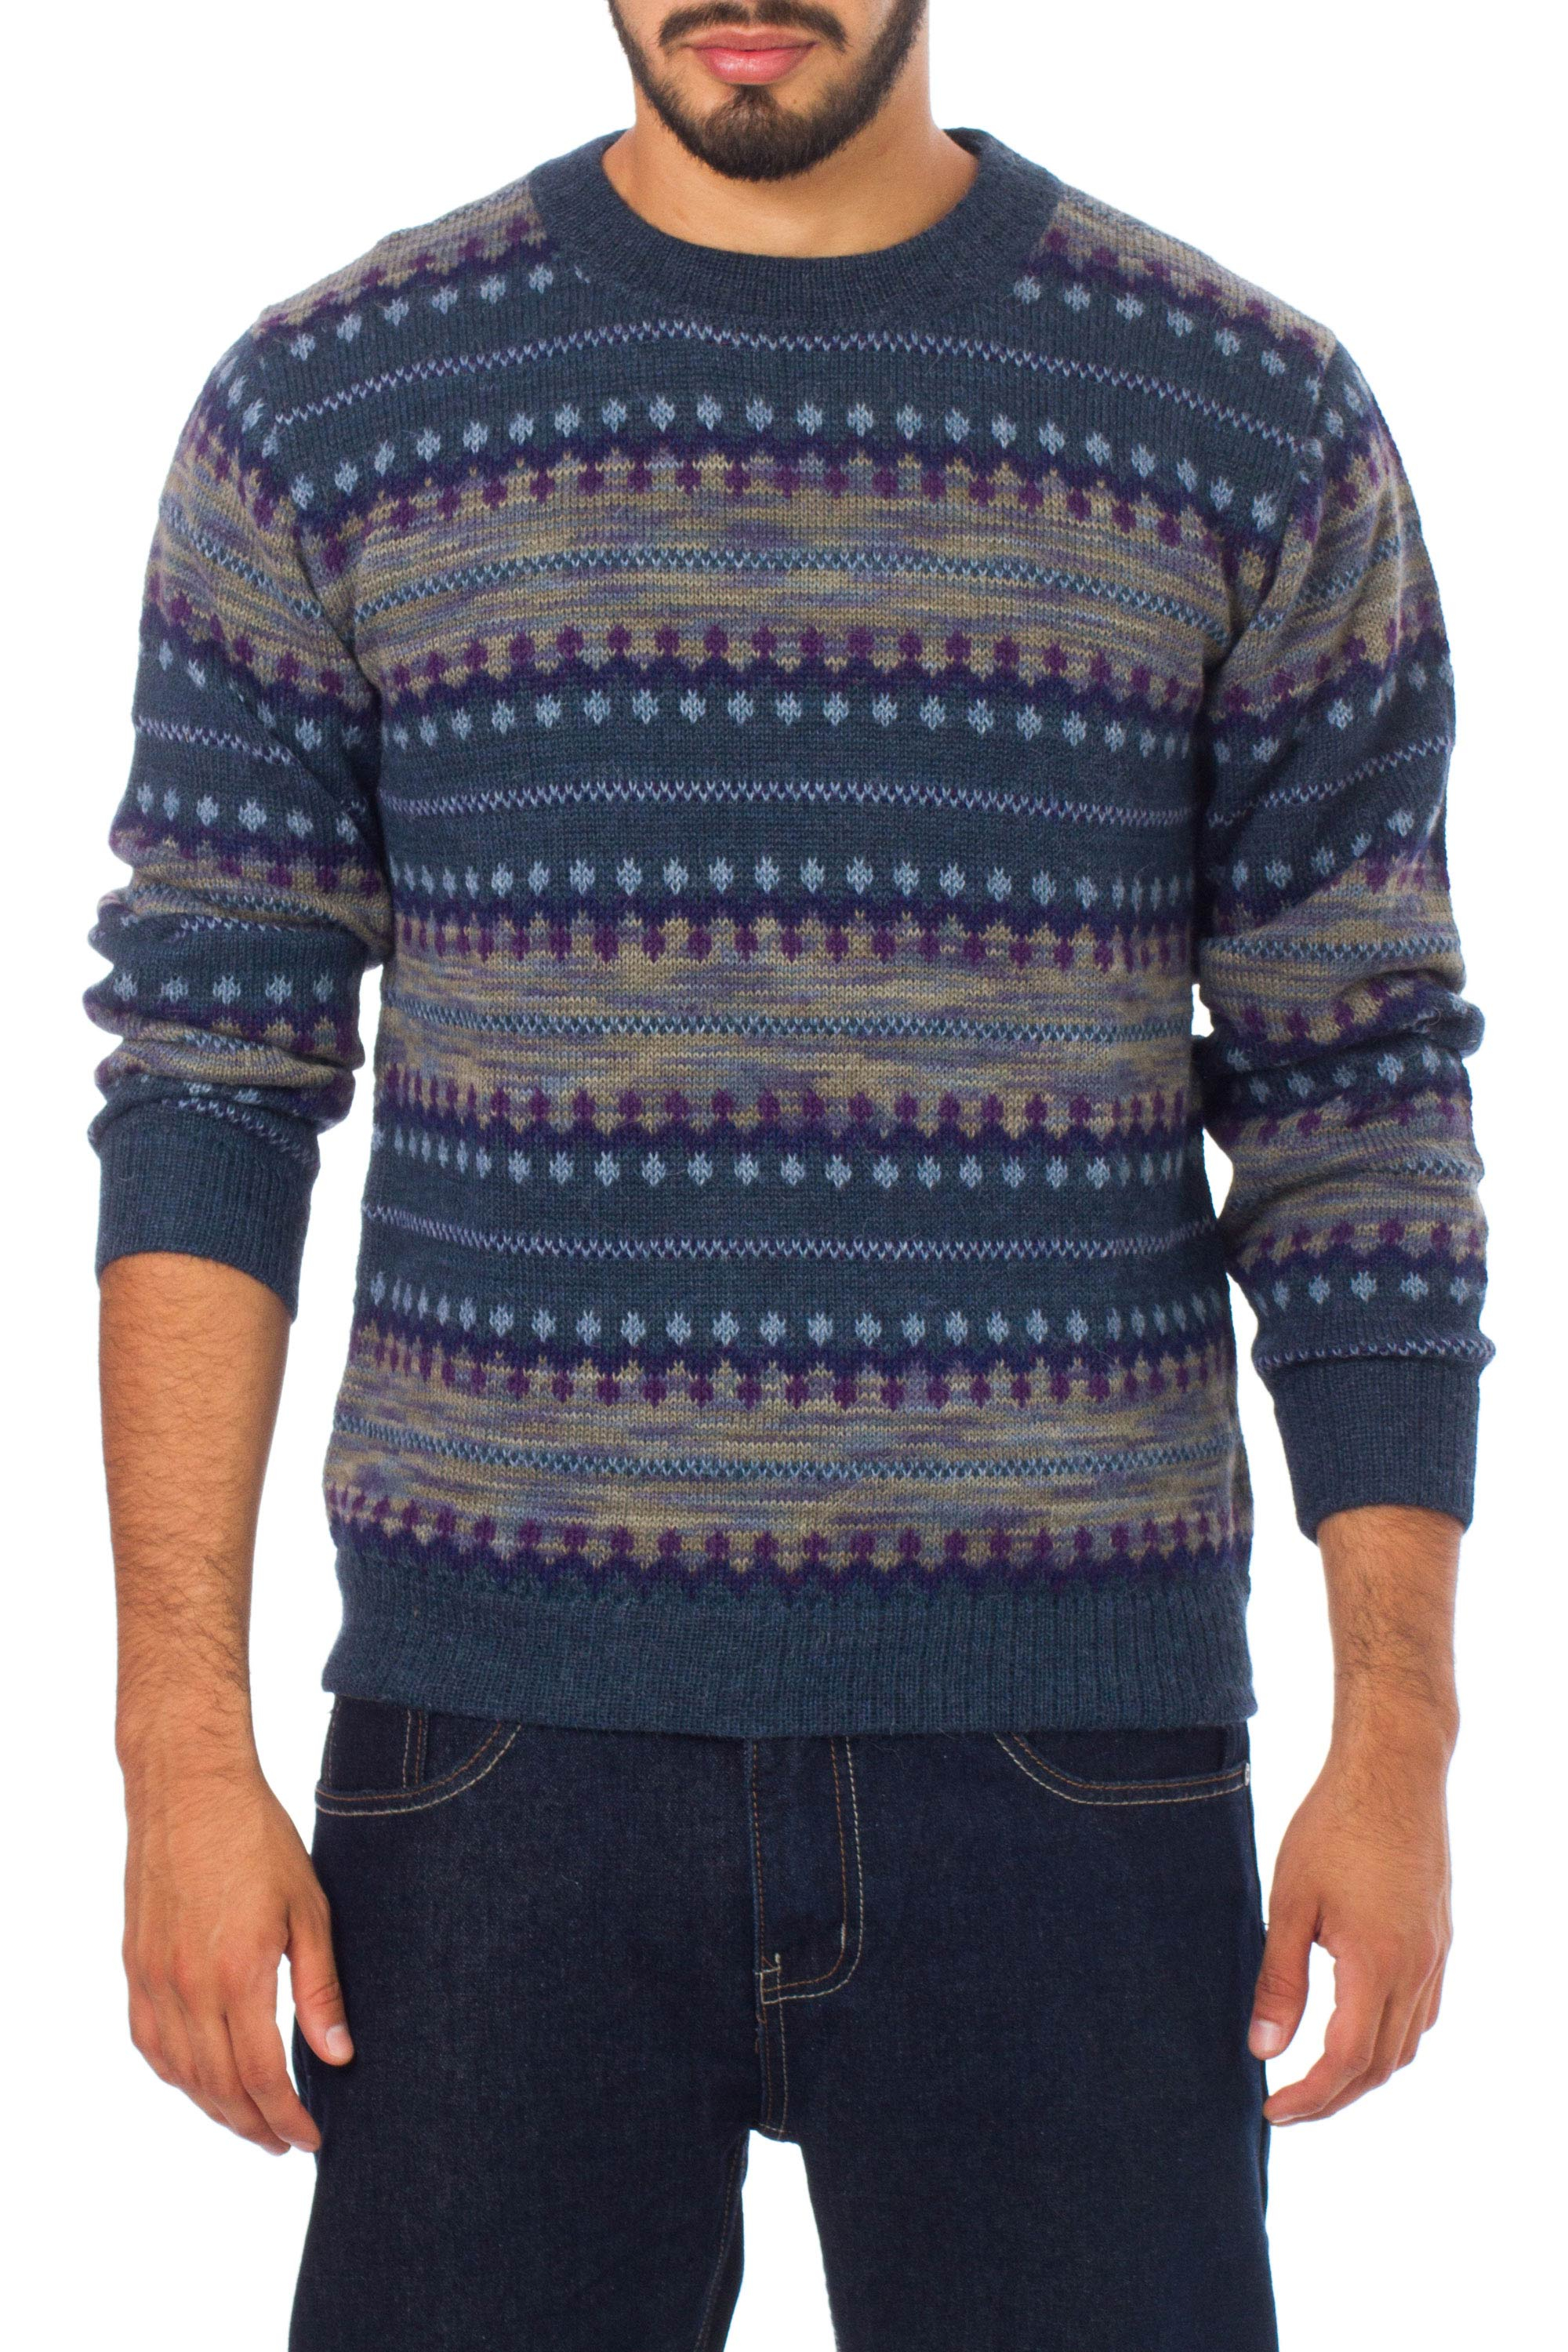 UNICEF Market | Men's Patterned Andean 100% Alpaca Sweater in Shades of ...